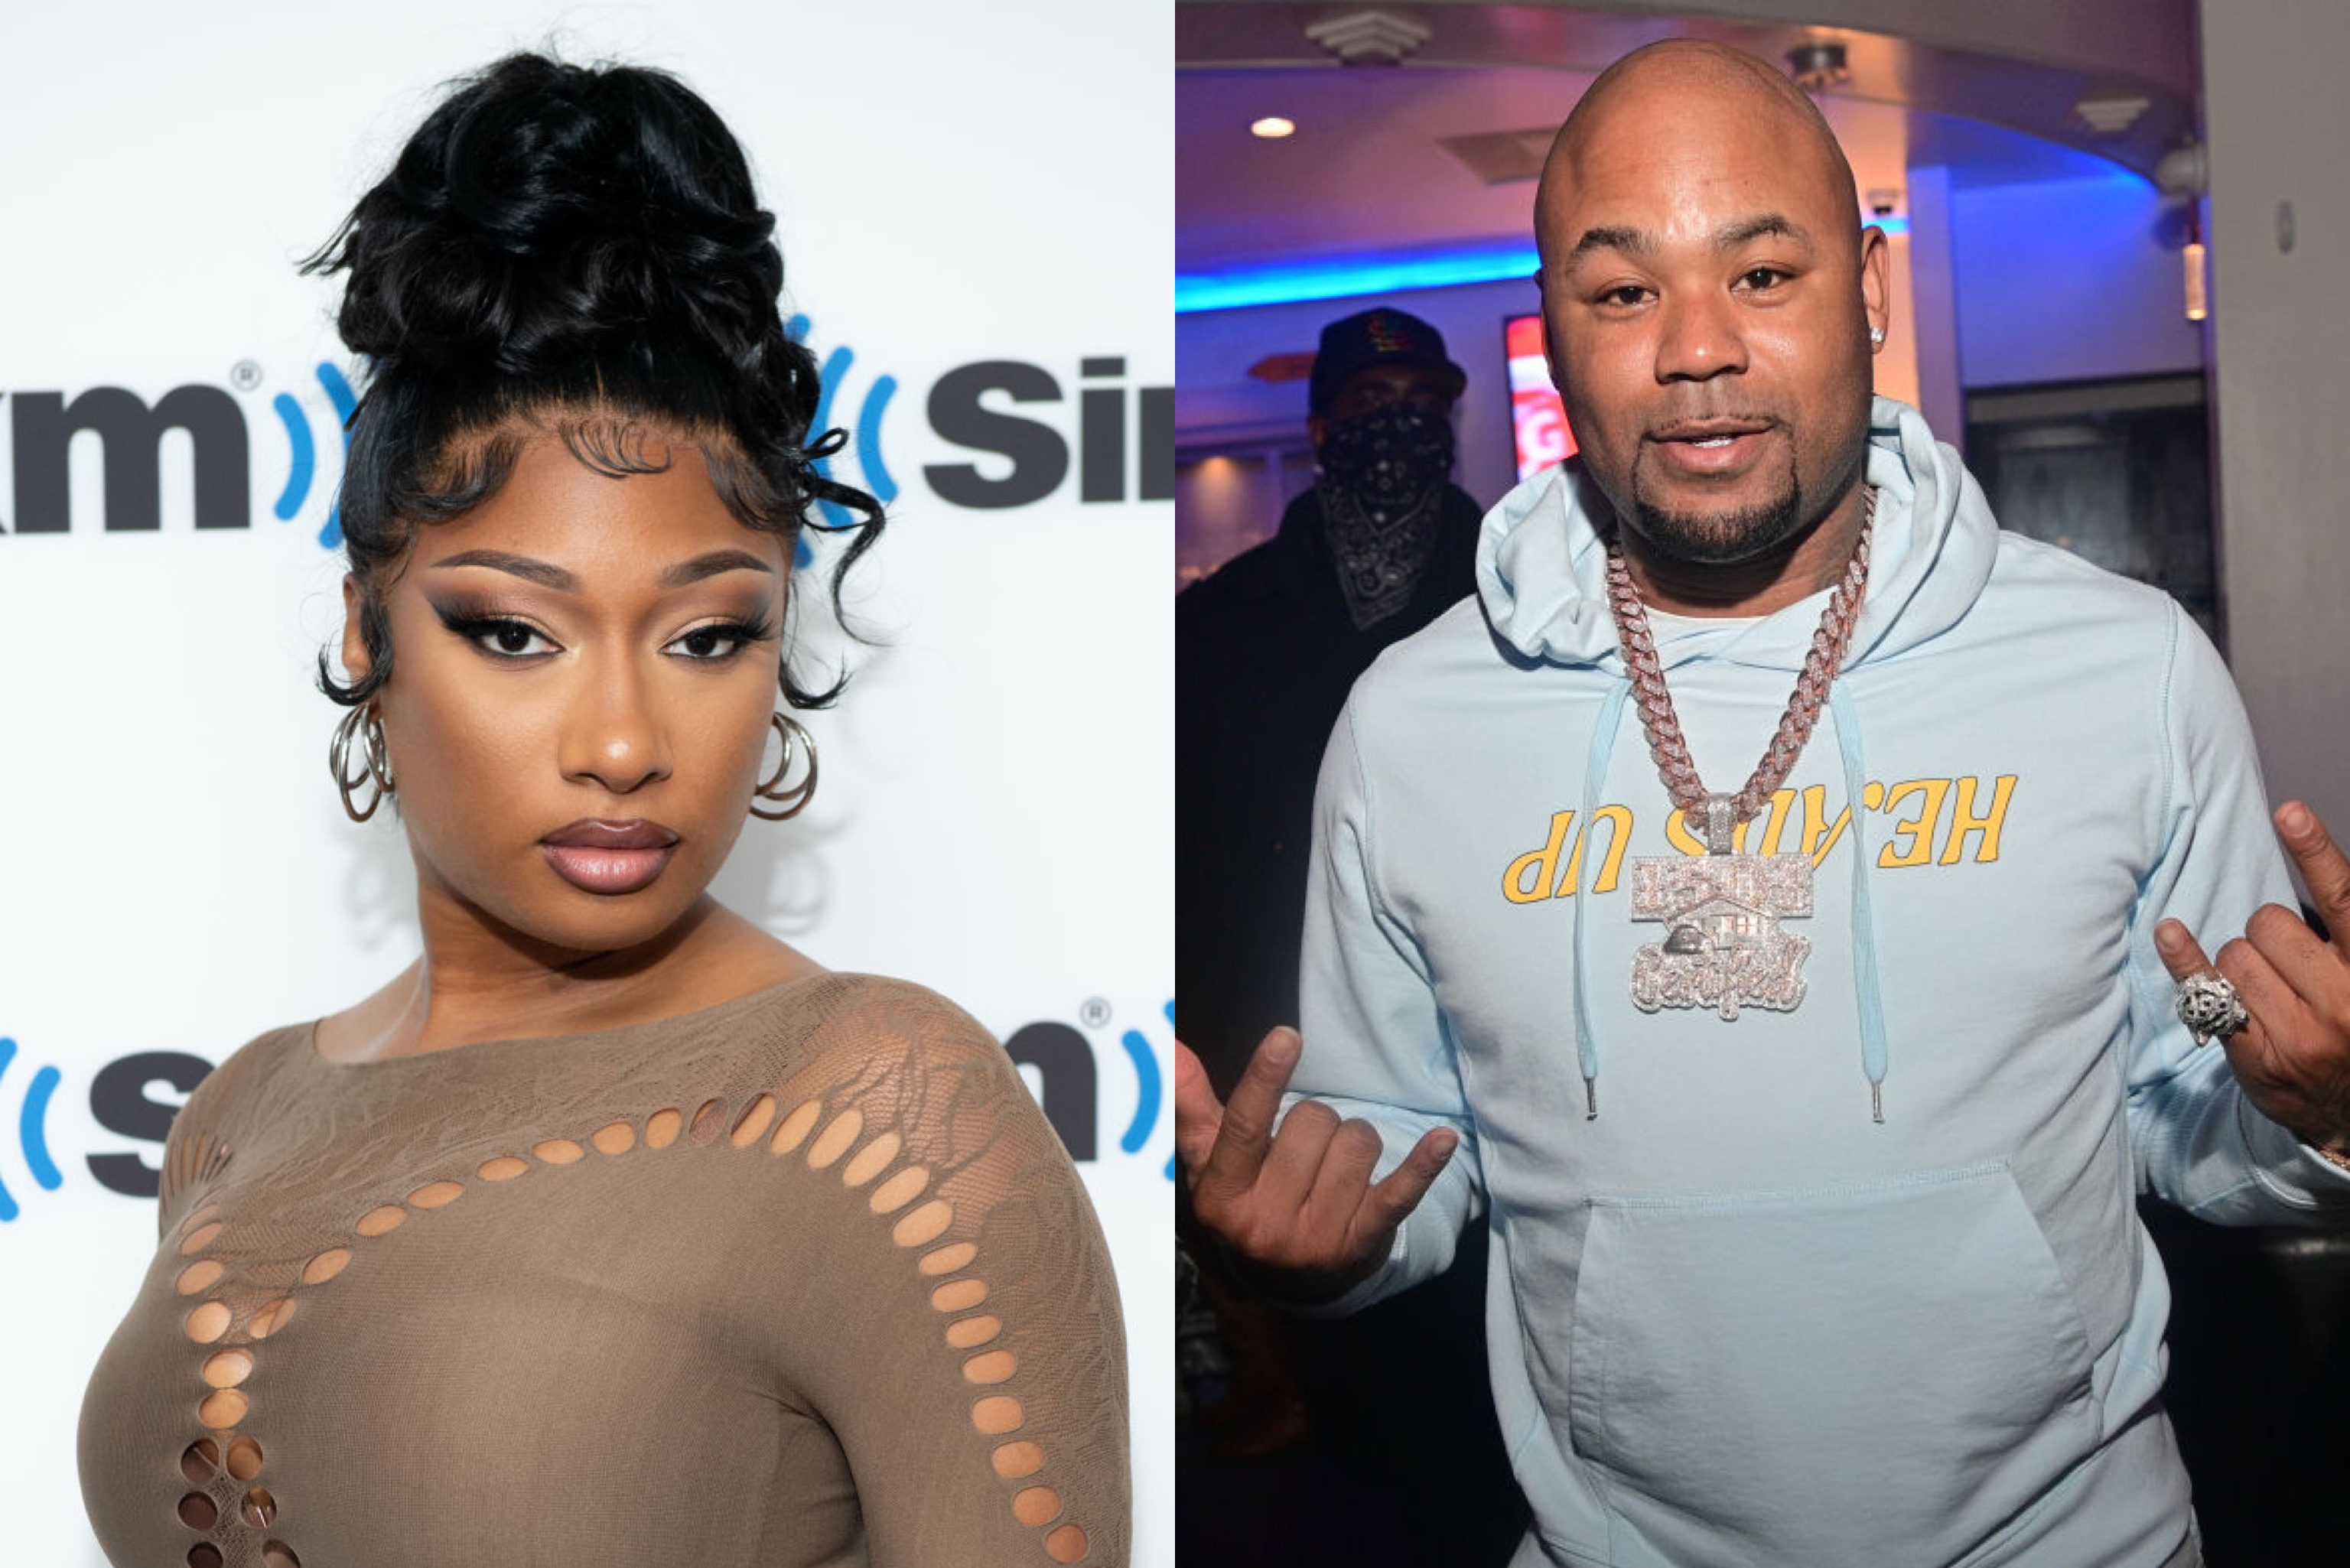 Megan Thee Stallion & Carl Crawford Feud Over Her Upcoming Album